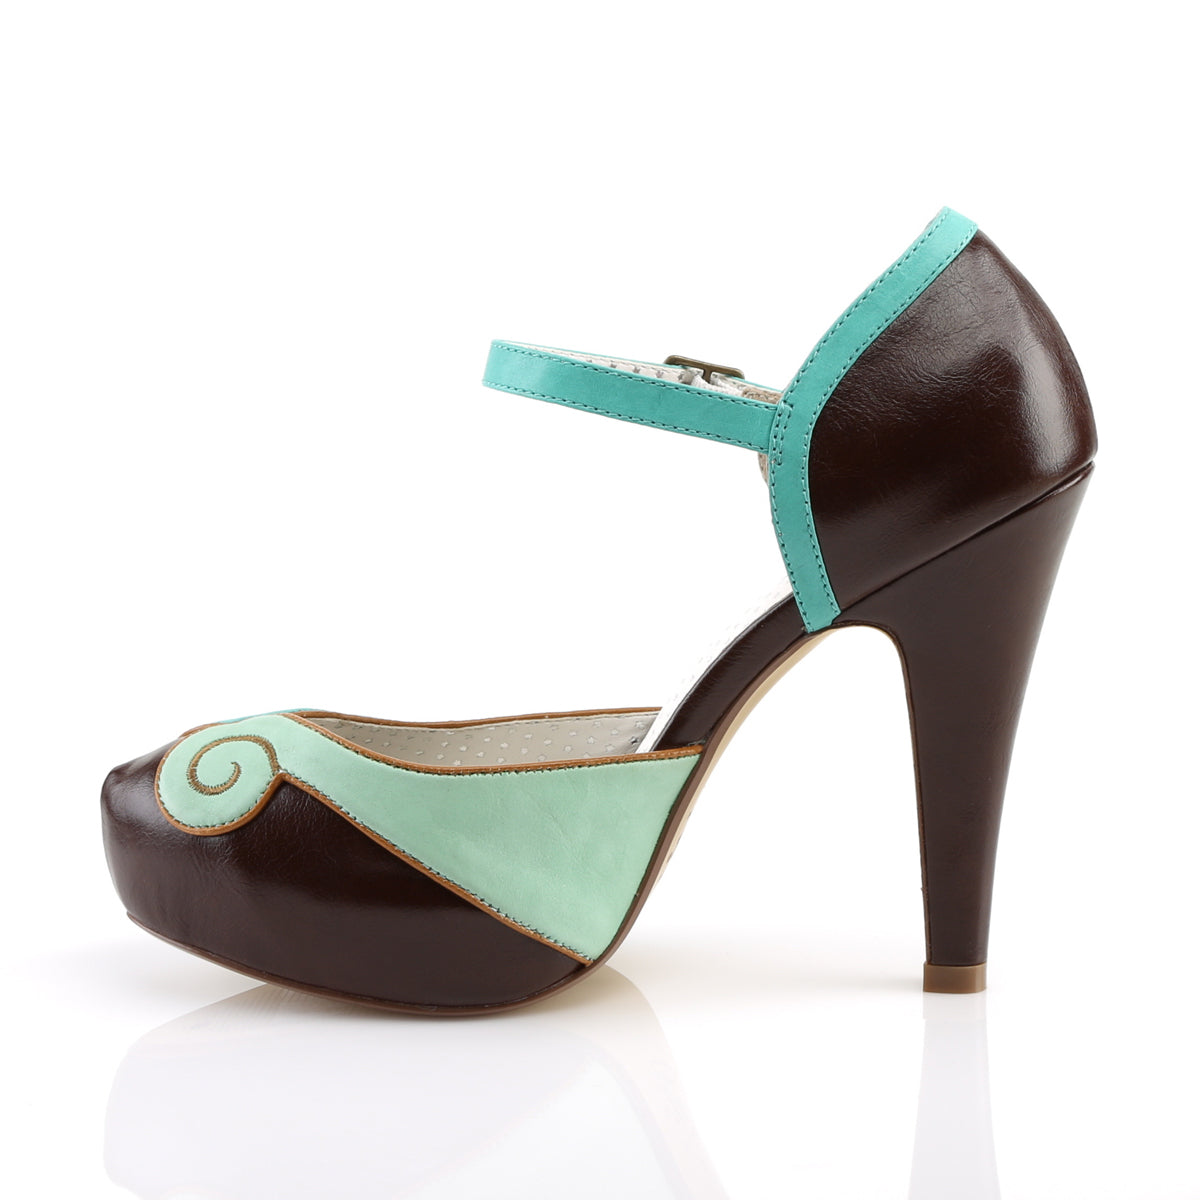 BETTIE-17 Sexy 4.5" Heel Teal-Brown Retro Glamour Platforms-Pin Up Couture- Sexy Shoes Pole Dance Heels